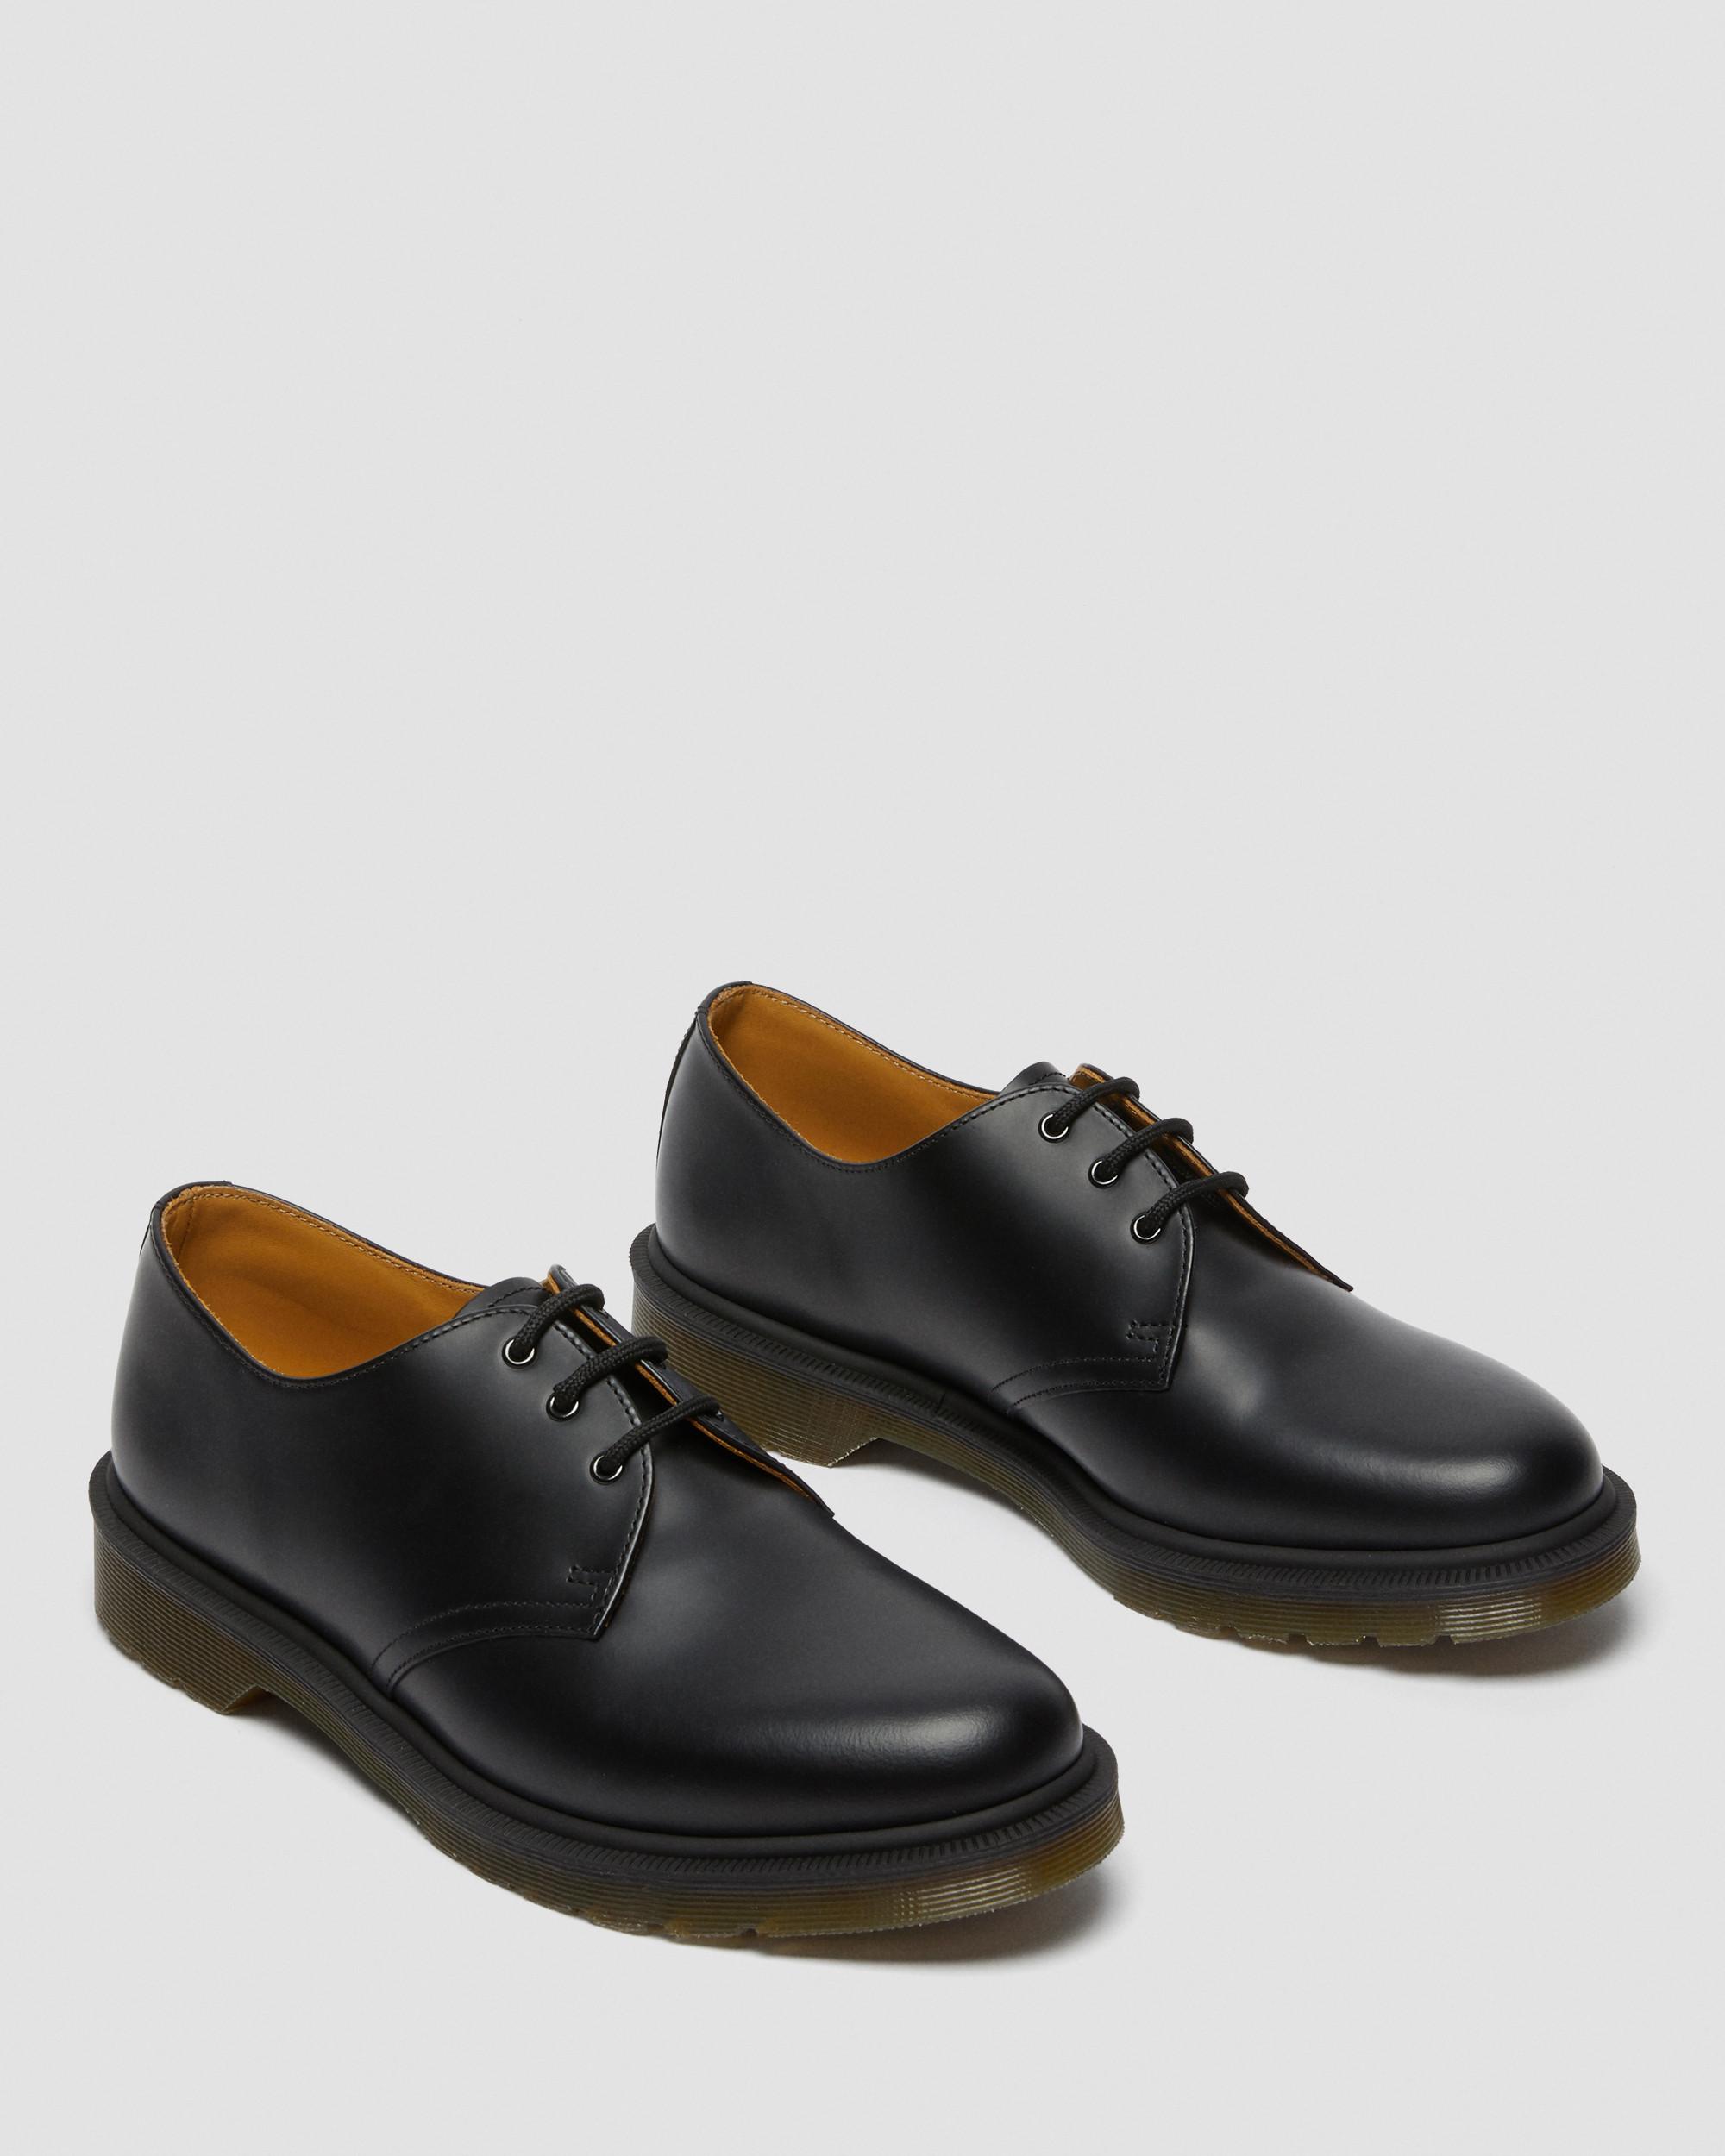 1461 Narrow Plain Welt Smooth Leather Oxford Shoes in Black | Dr. Martens